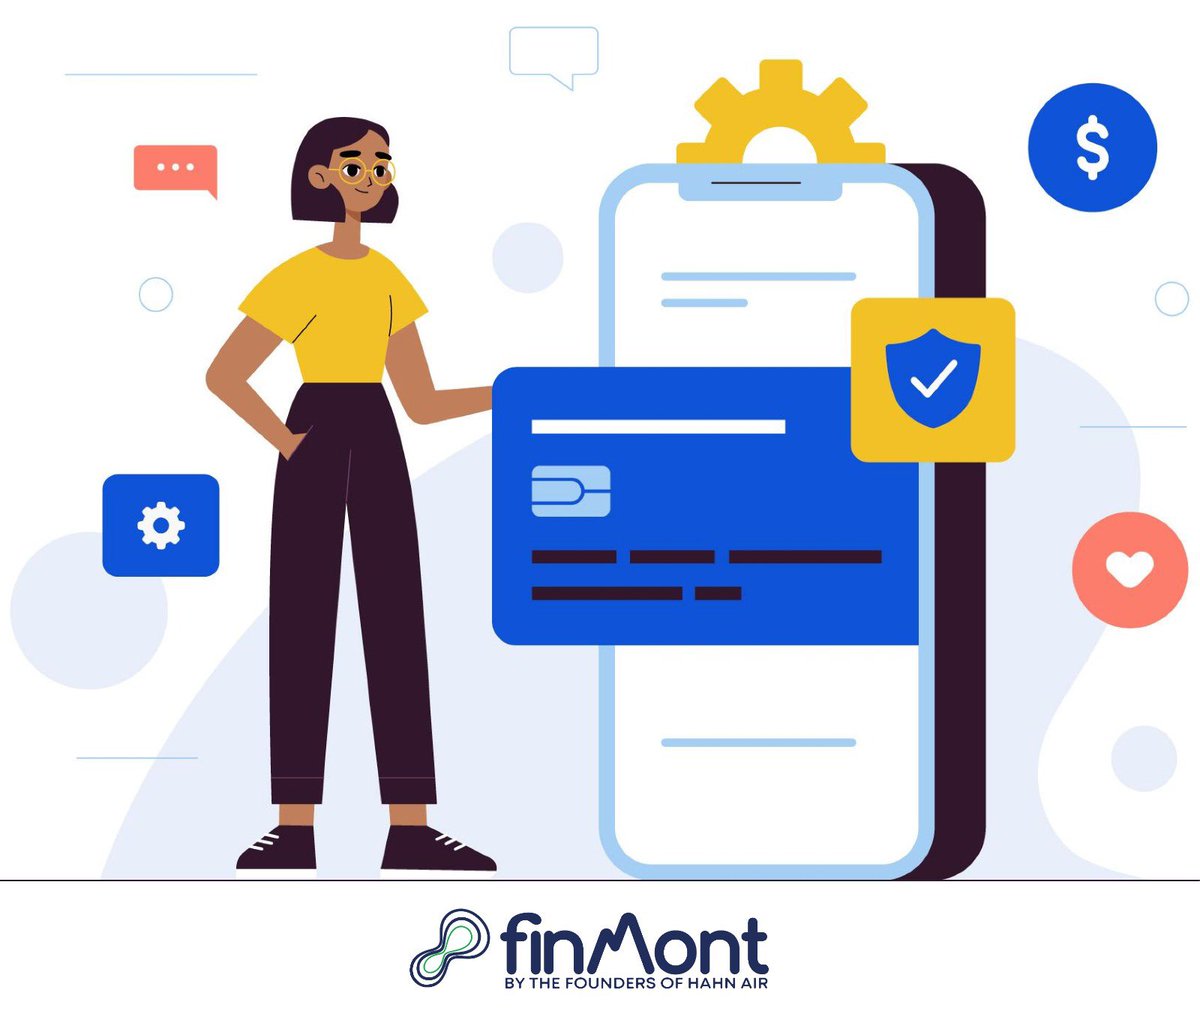 Reduce cart abandonment, boost conversions! FinMont offers 200+ payment methods for seamless checkouts. Try now. 🔗finmont.com #TravelIndustry #FinMont #FinTech #TravelBusiness #PaymentOrchestration #travelpayments